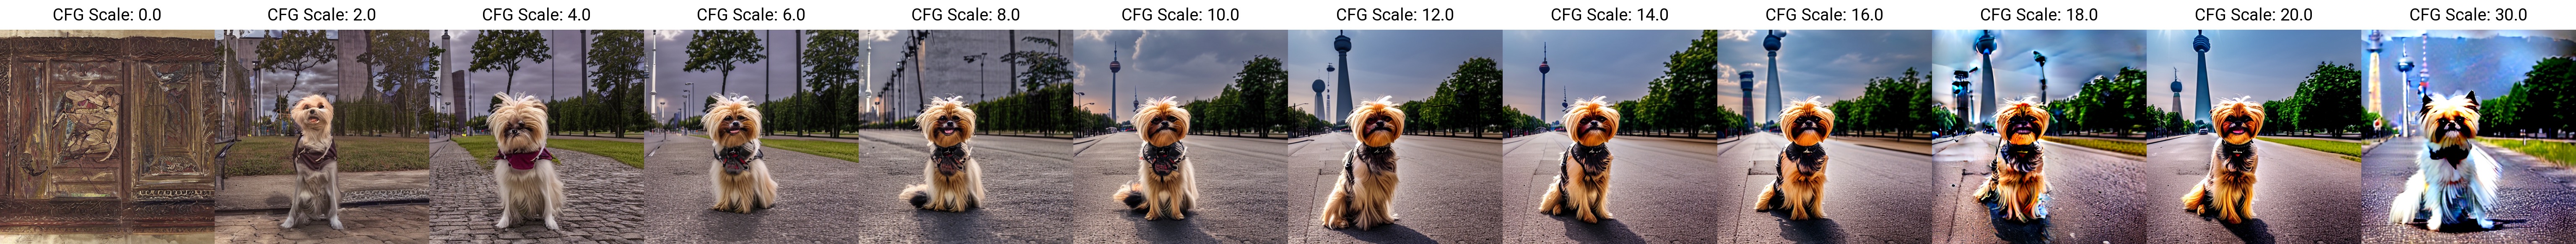 Series of images showing how the image content changes with the value of CFG scale (Stable Diffusion 1.5)